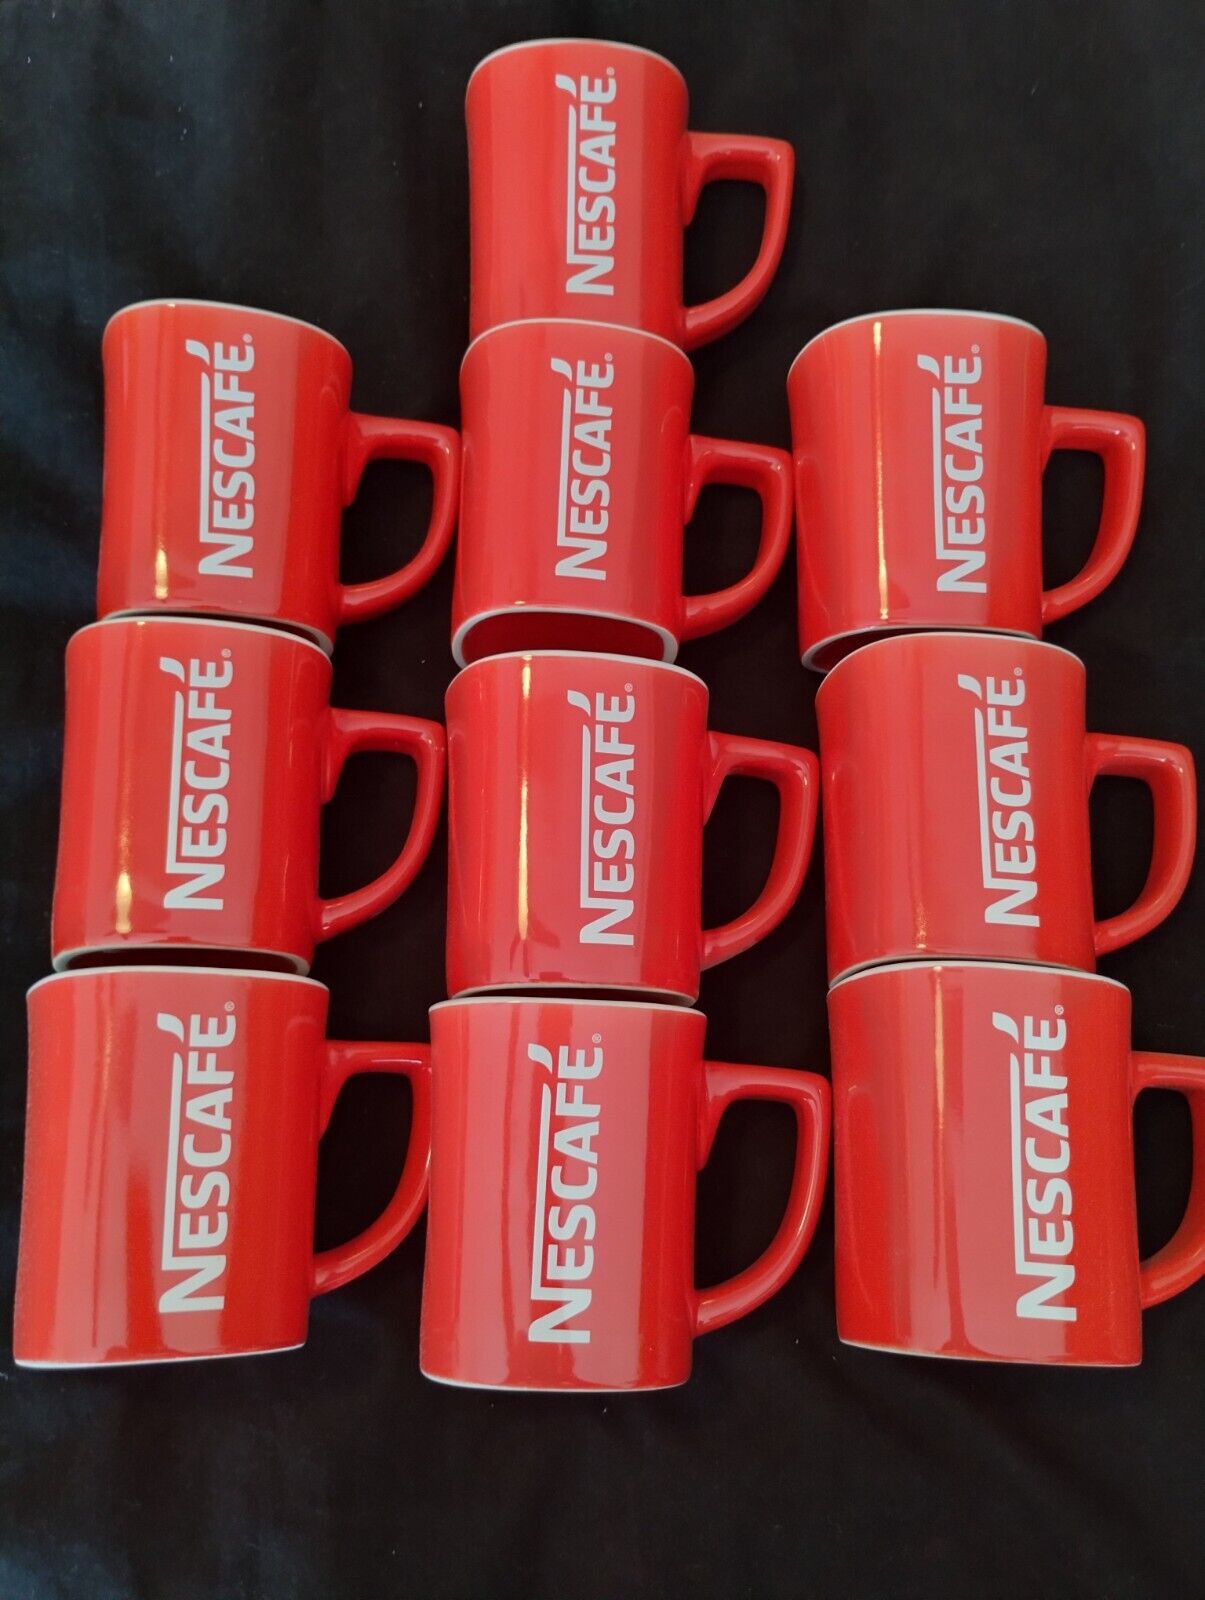 6 Nescafe Red Cup Mug Coffee Latte Collectible Classic Gift 8 oz Holiday 